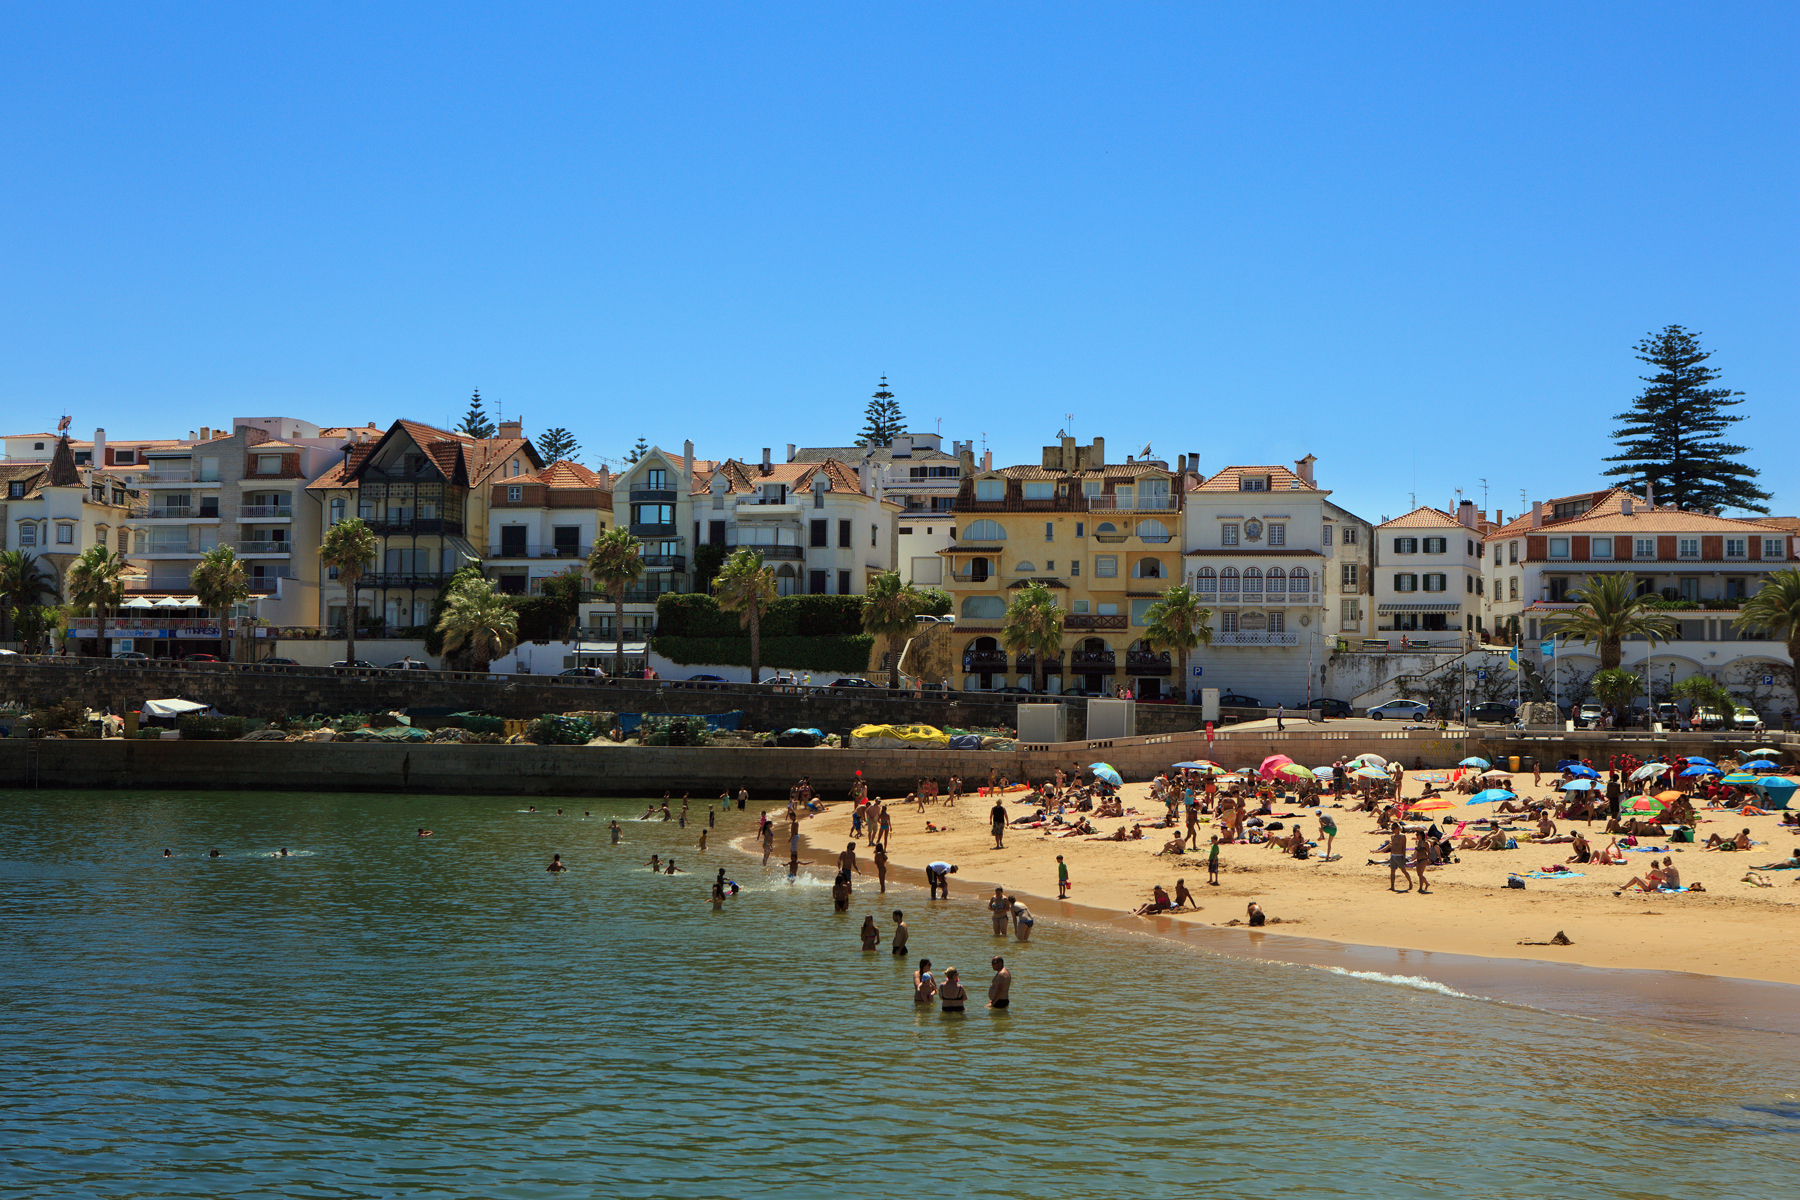 A row of multi-storey houses facing the sea. To the right, a sandy beach is nestled against a low sea wall. People lie on the beach under umbrellas while others walk the sands and swim in the calm waters.